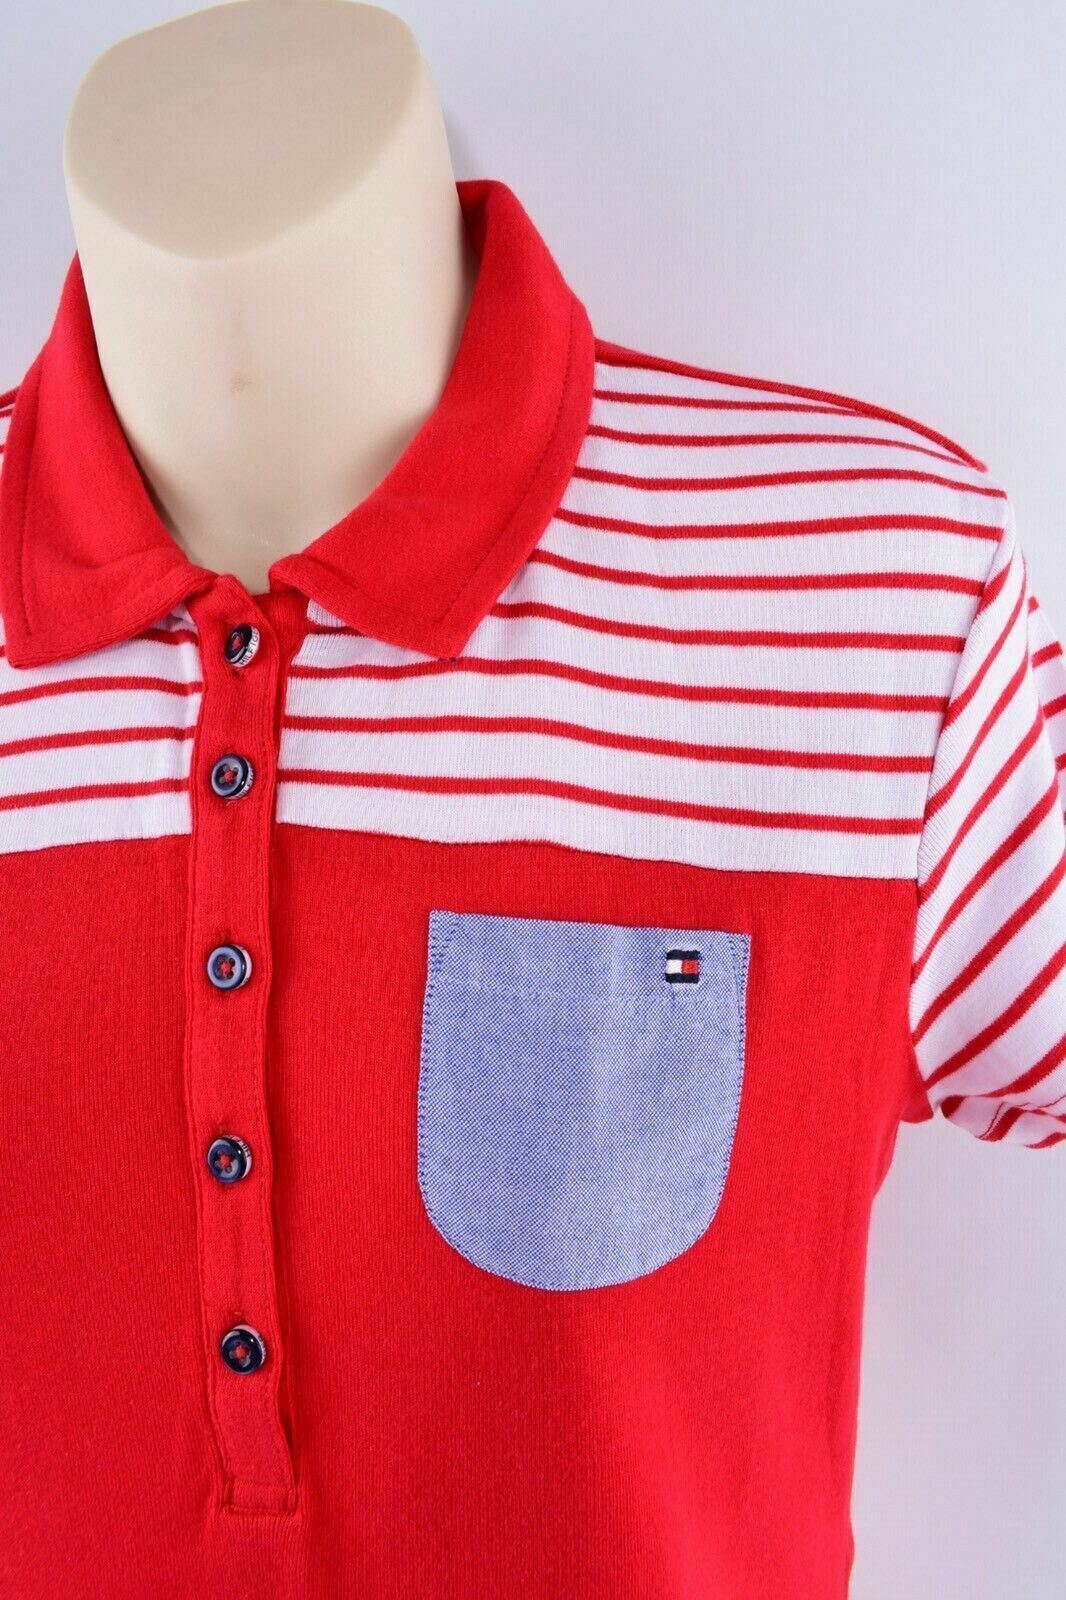 TOMMY HILFIGER Women's Red / Striped Polo Shirt Top, size XS or size L